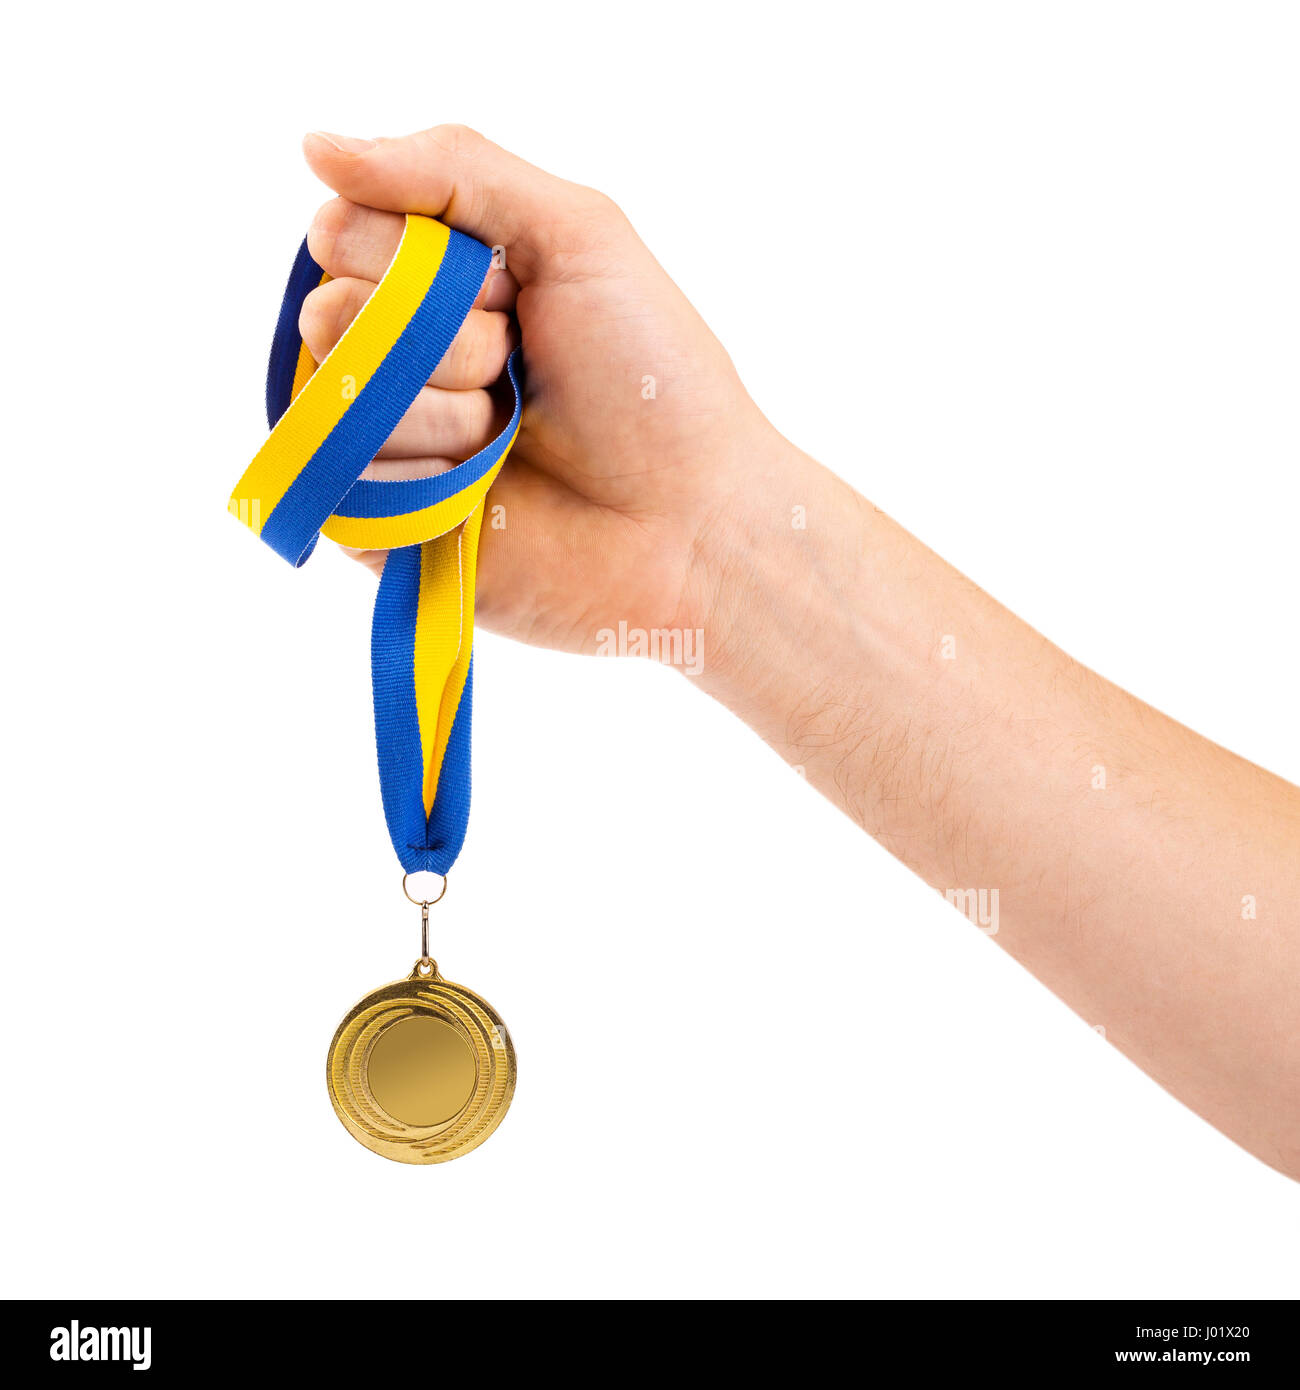 gold medal in hand on white background Stock Photo